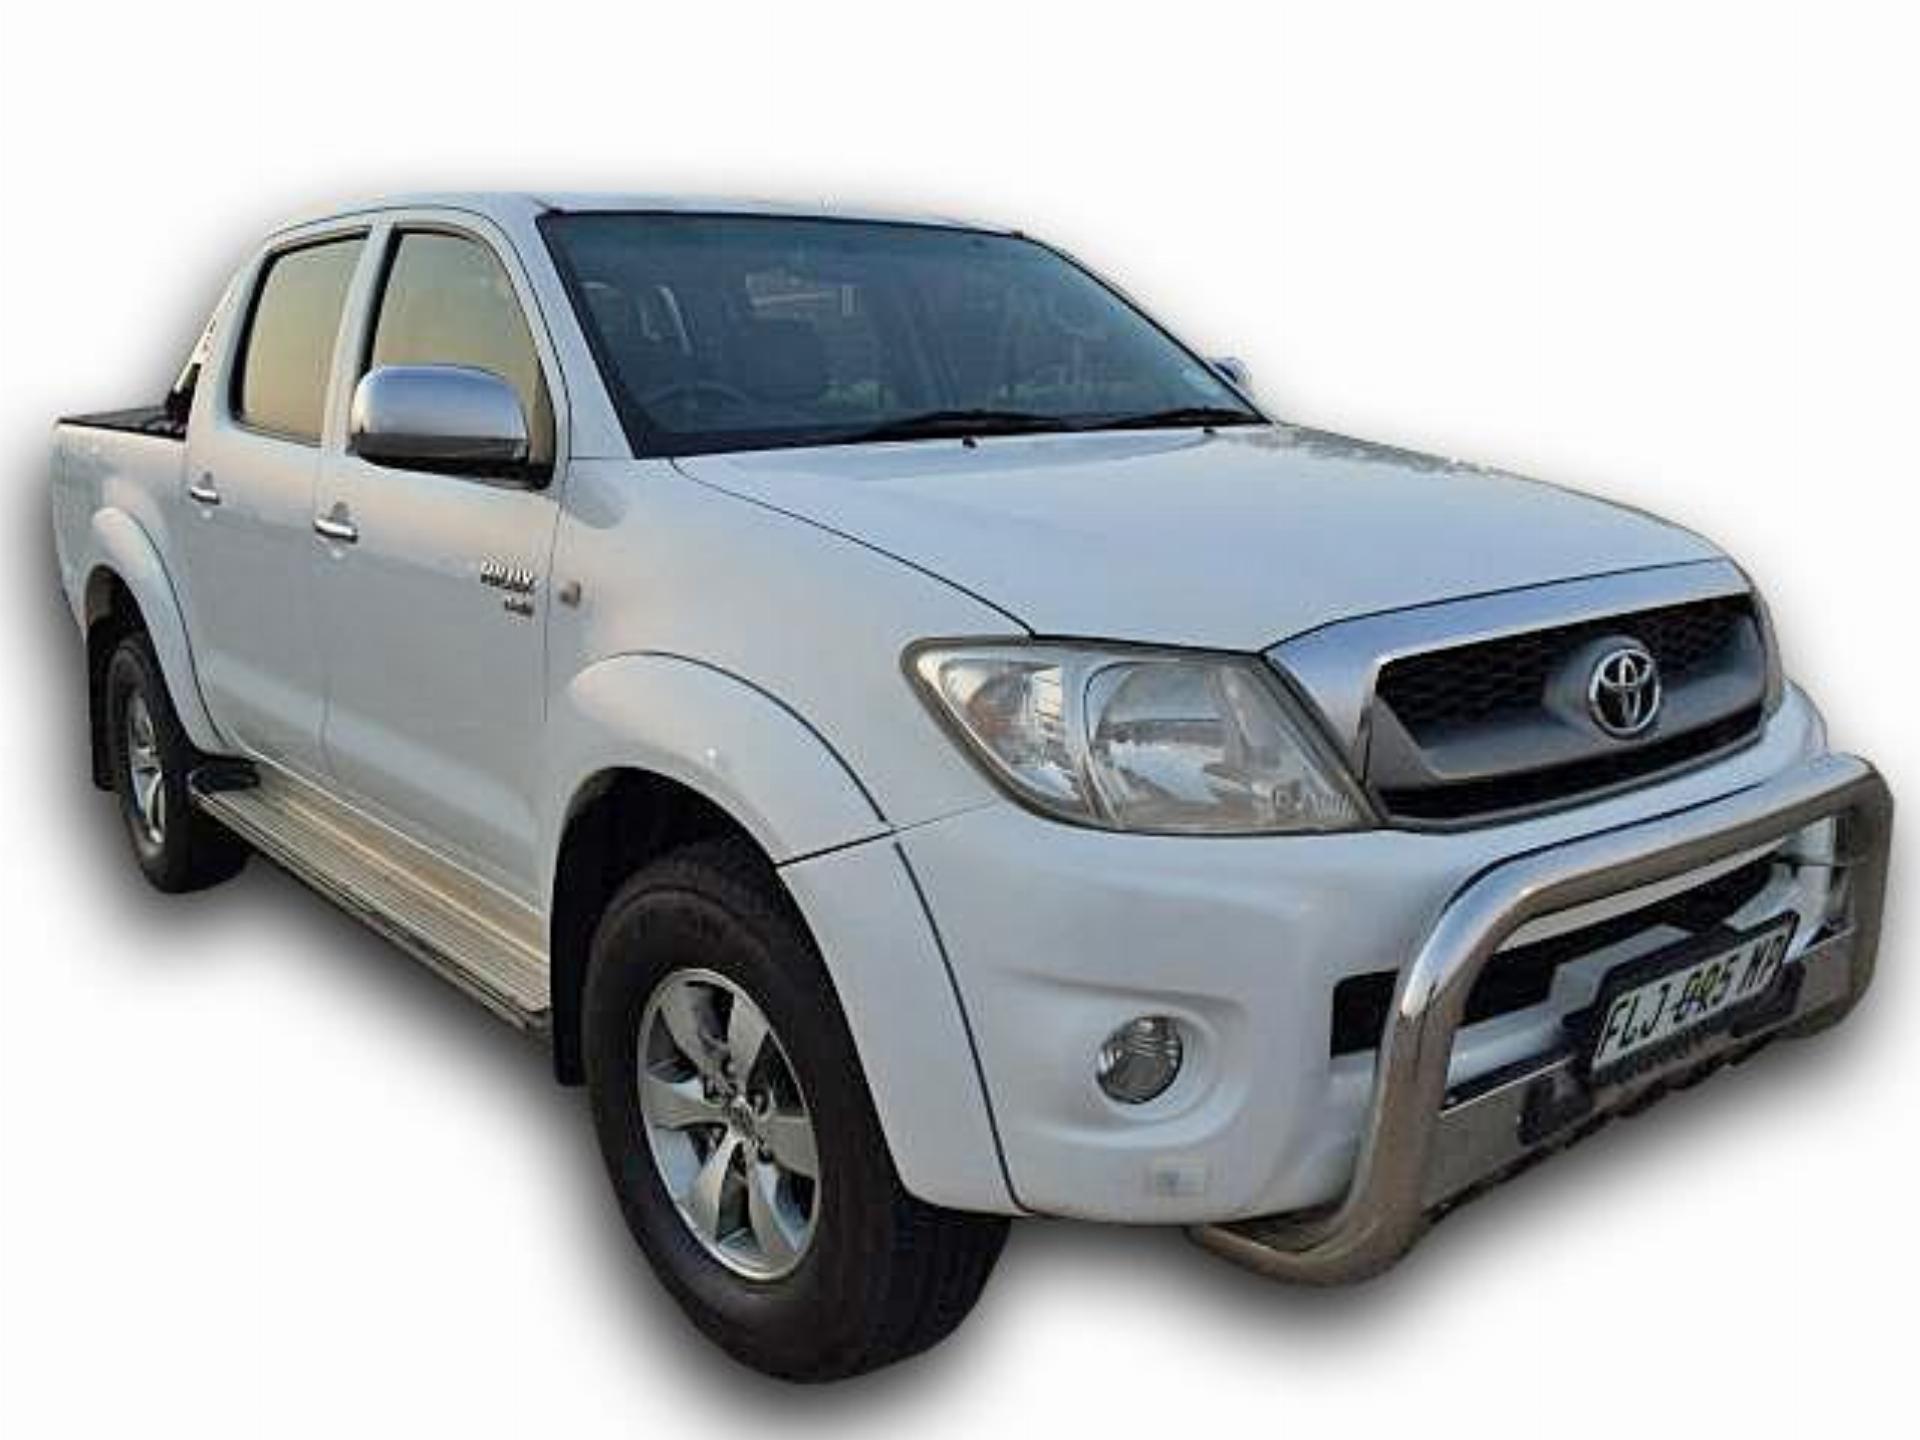 Used Toyota Hilux DC 2.5 D4D RB Raider 2009 on auction